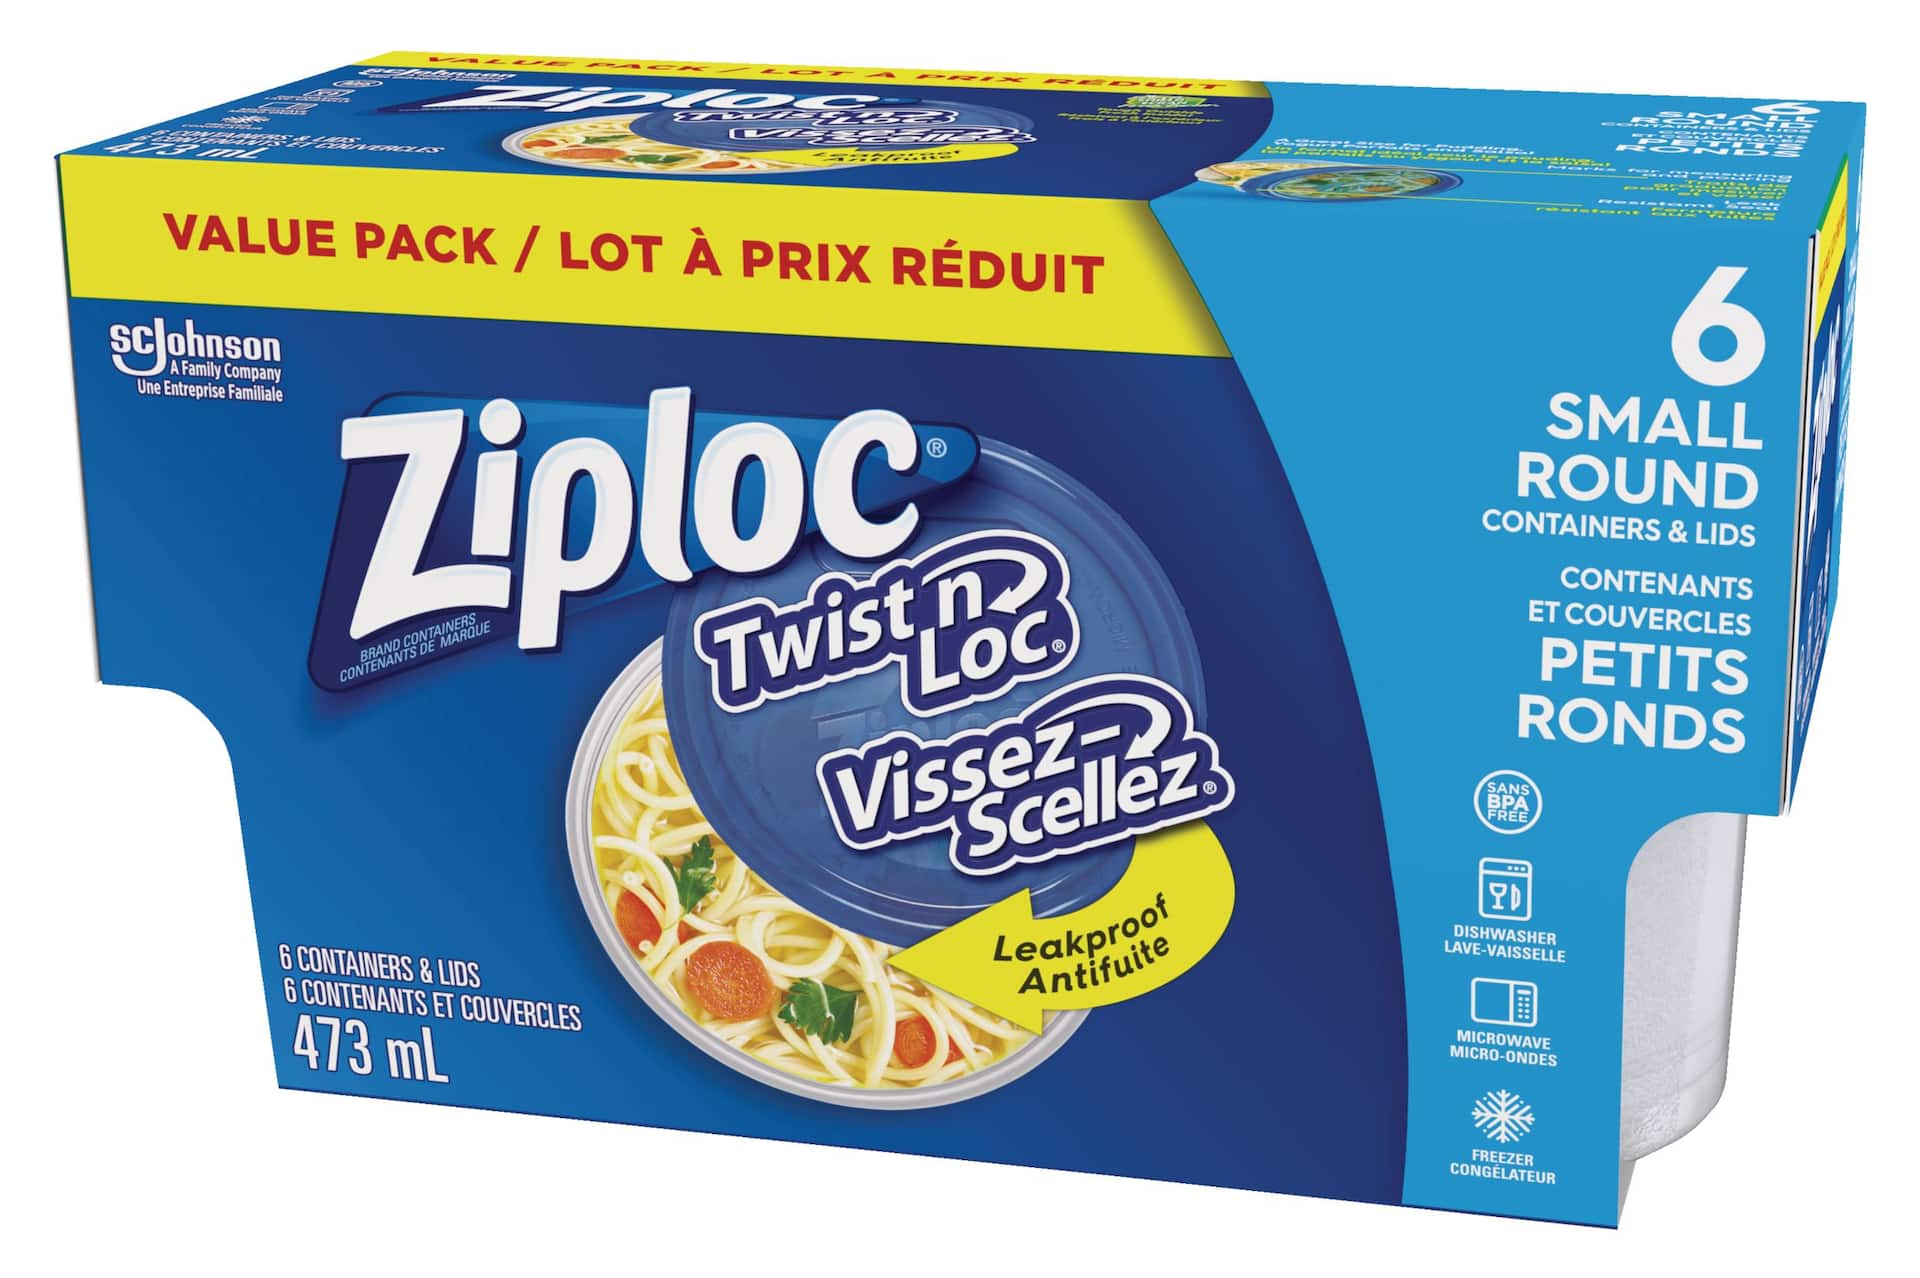 Ziploc Twist 'n Loc Storage Containers for Food Travel and Organization  Dishwasher Safe Extra Small Round